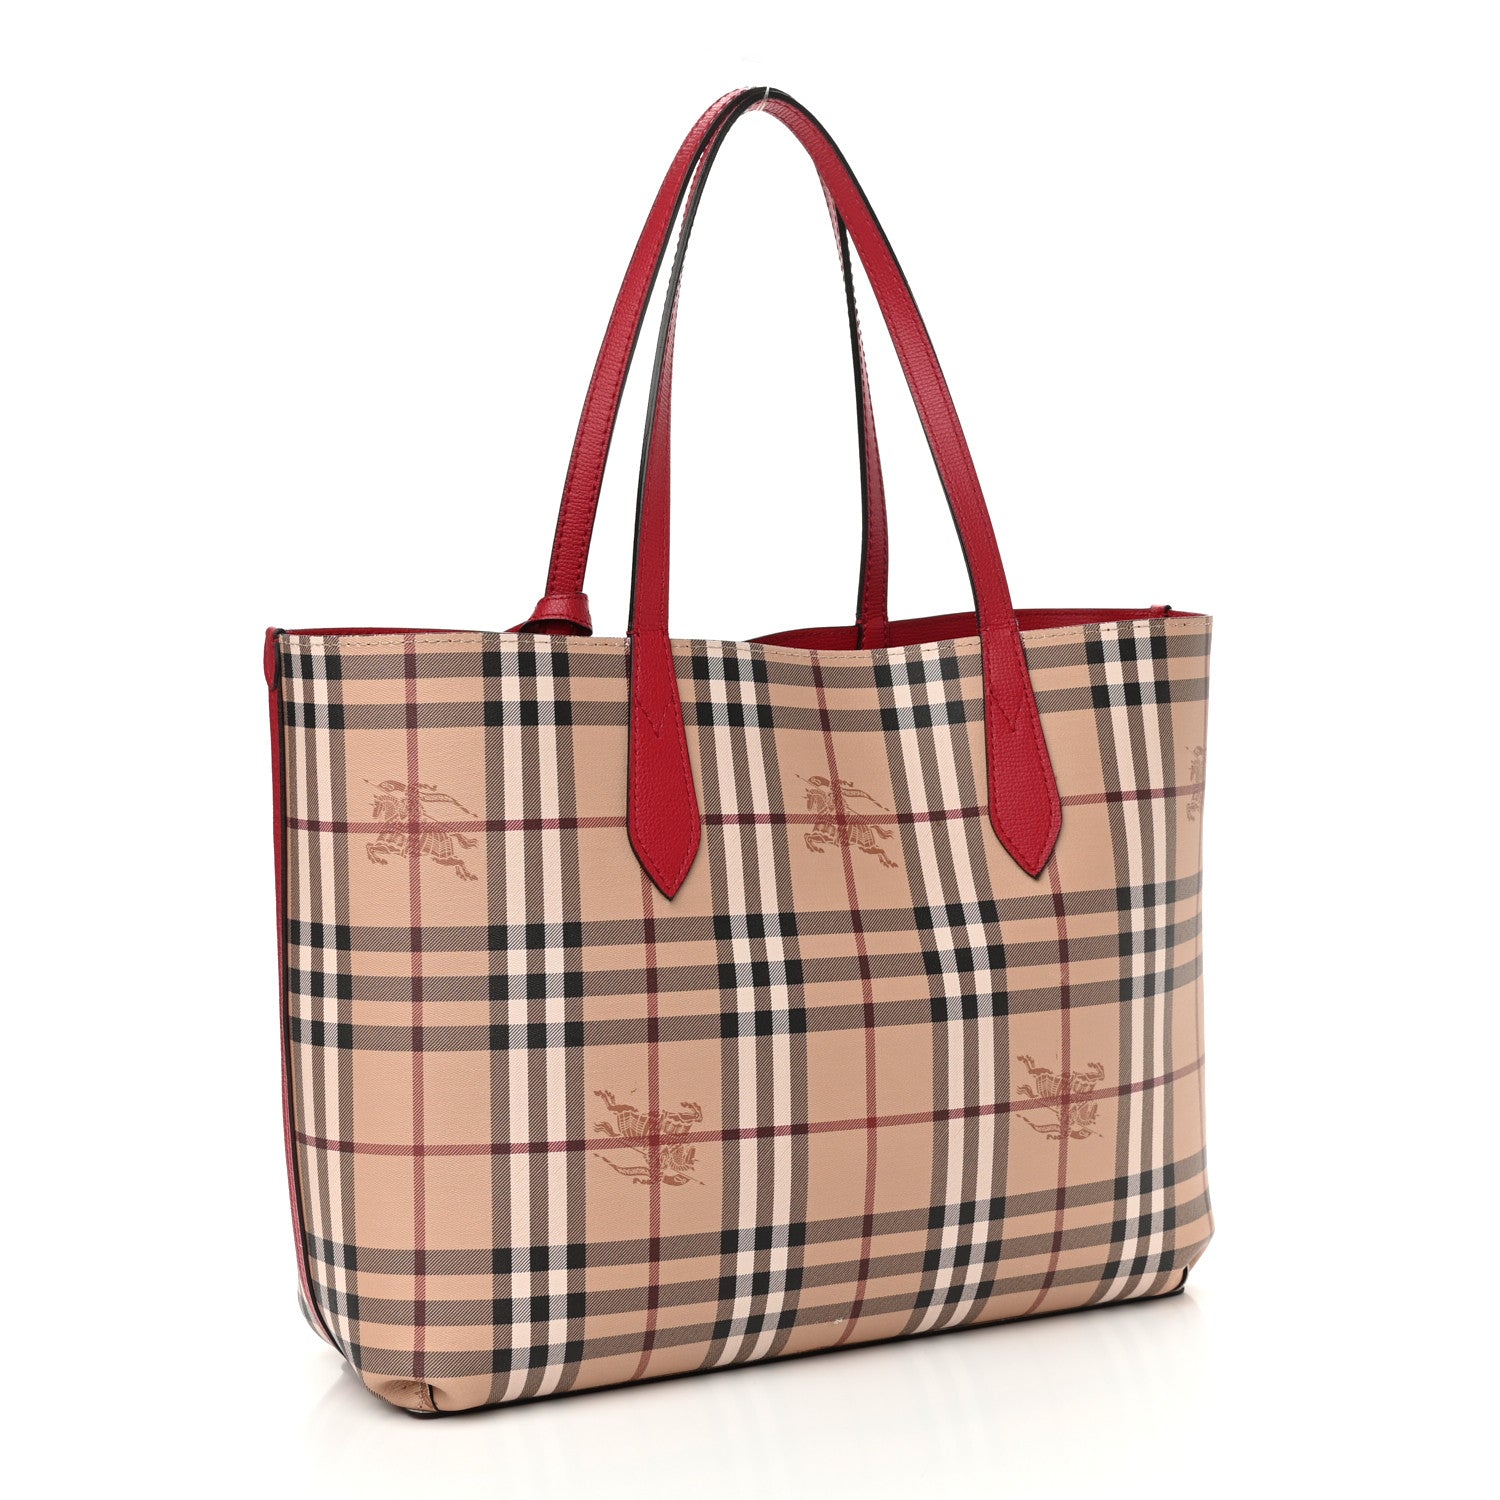 Burberry The Medium Reversible Tote In Haymarket Check And Leather Coral  Red